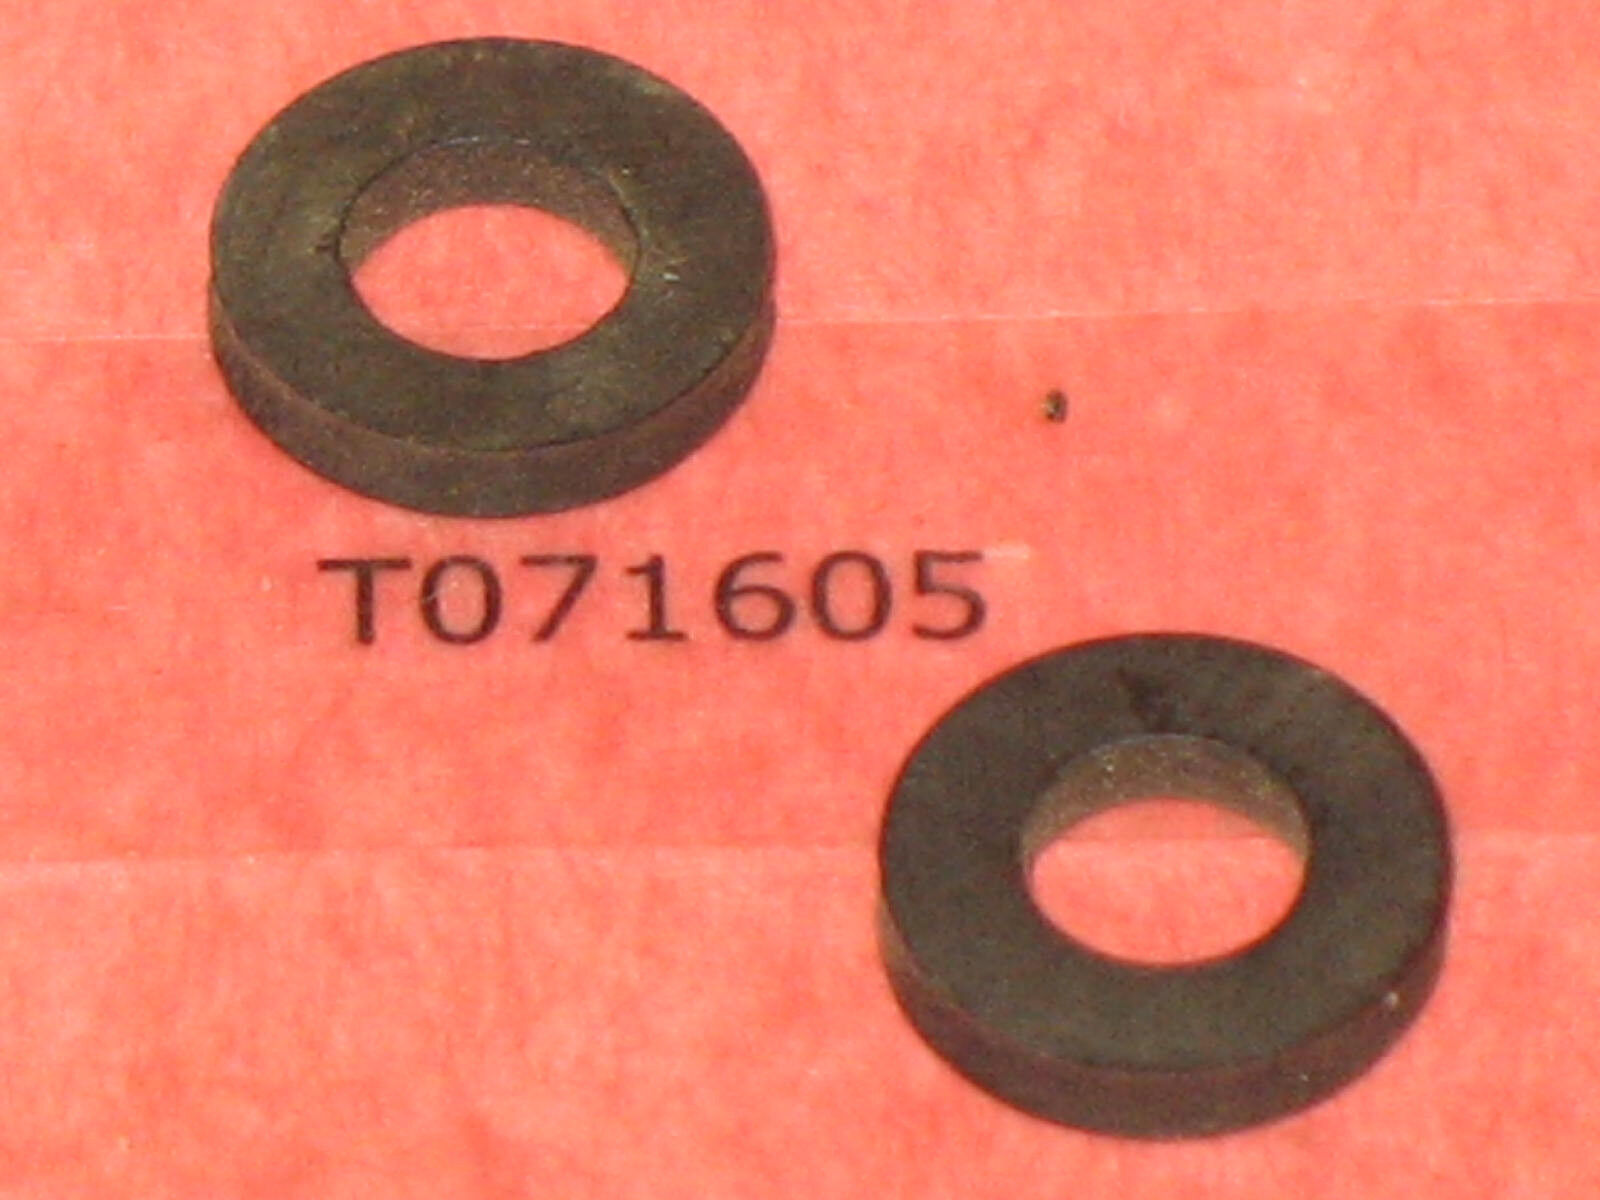 Lot 2 genuine McCulloch 50261-26 rubber seal ring gasket vintage antique saw nos